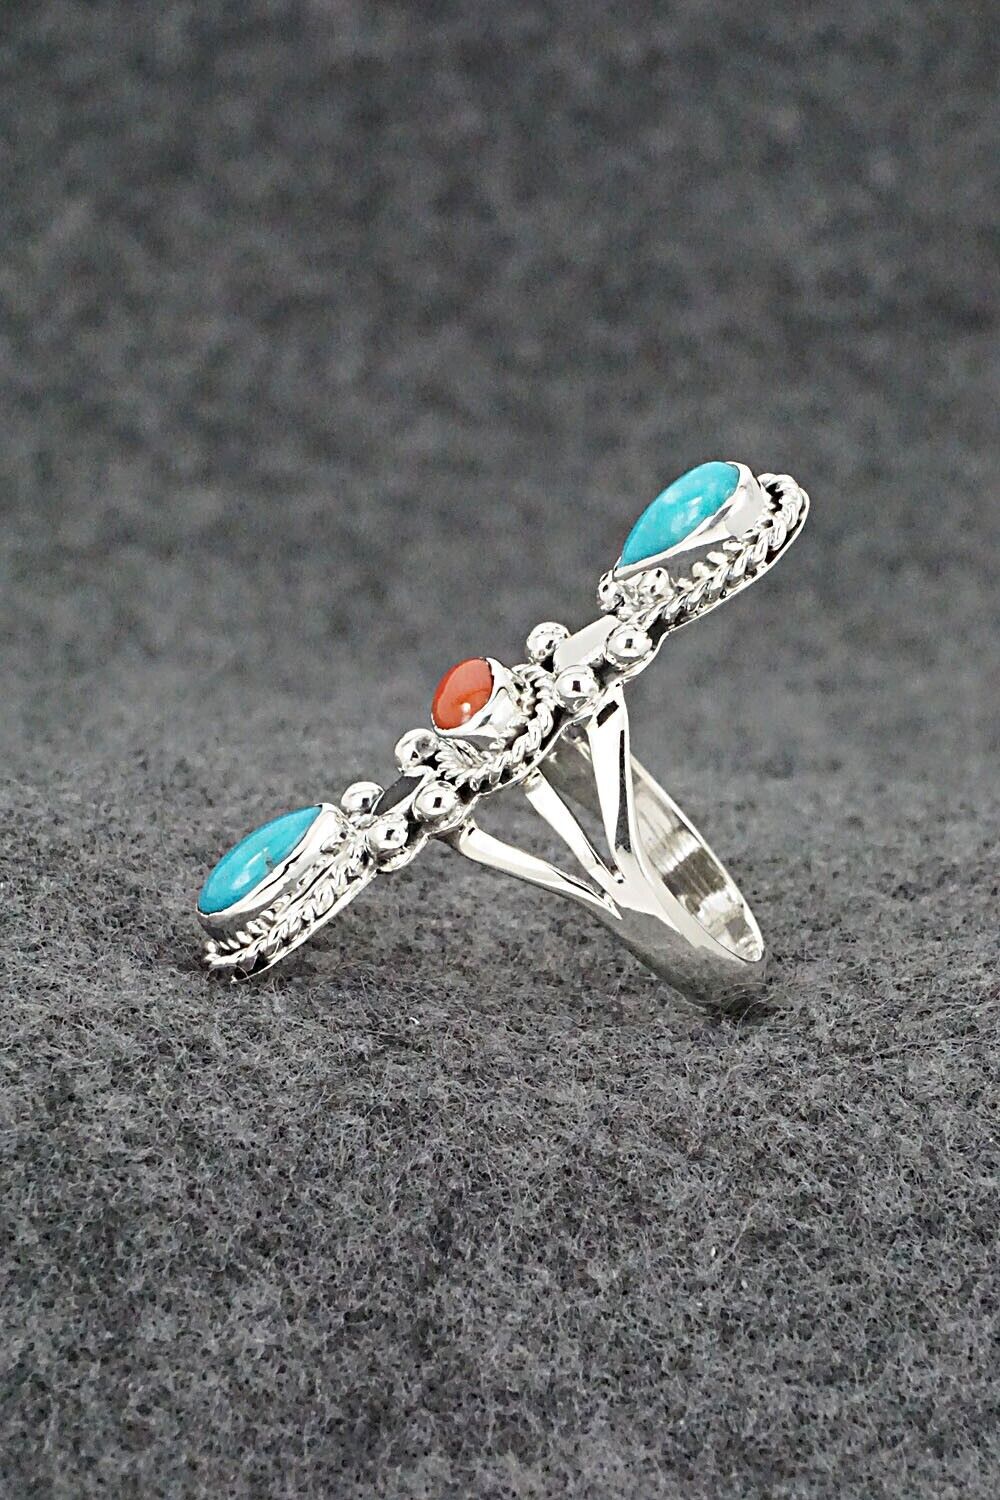 Turquoise, Coral & Sterling Silver Ring - Andrew Vandever - Size 6